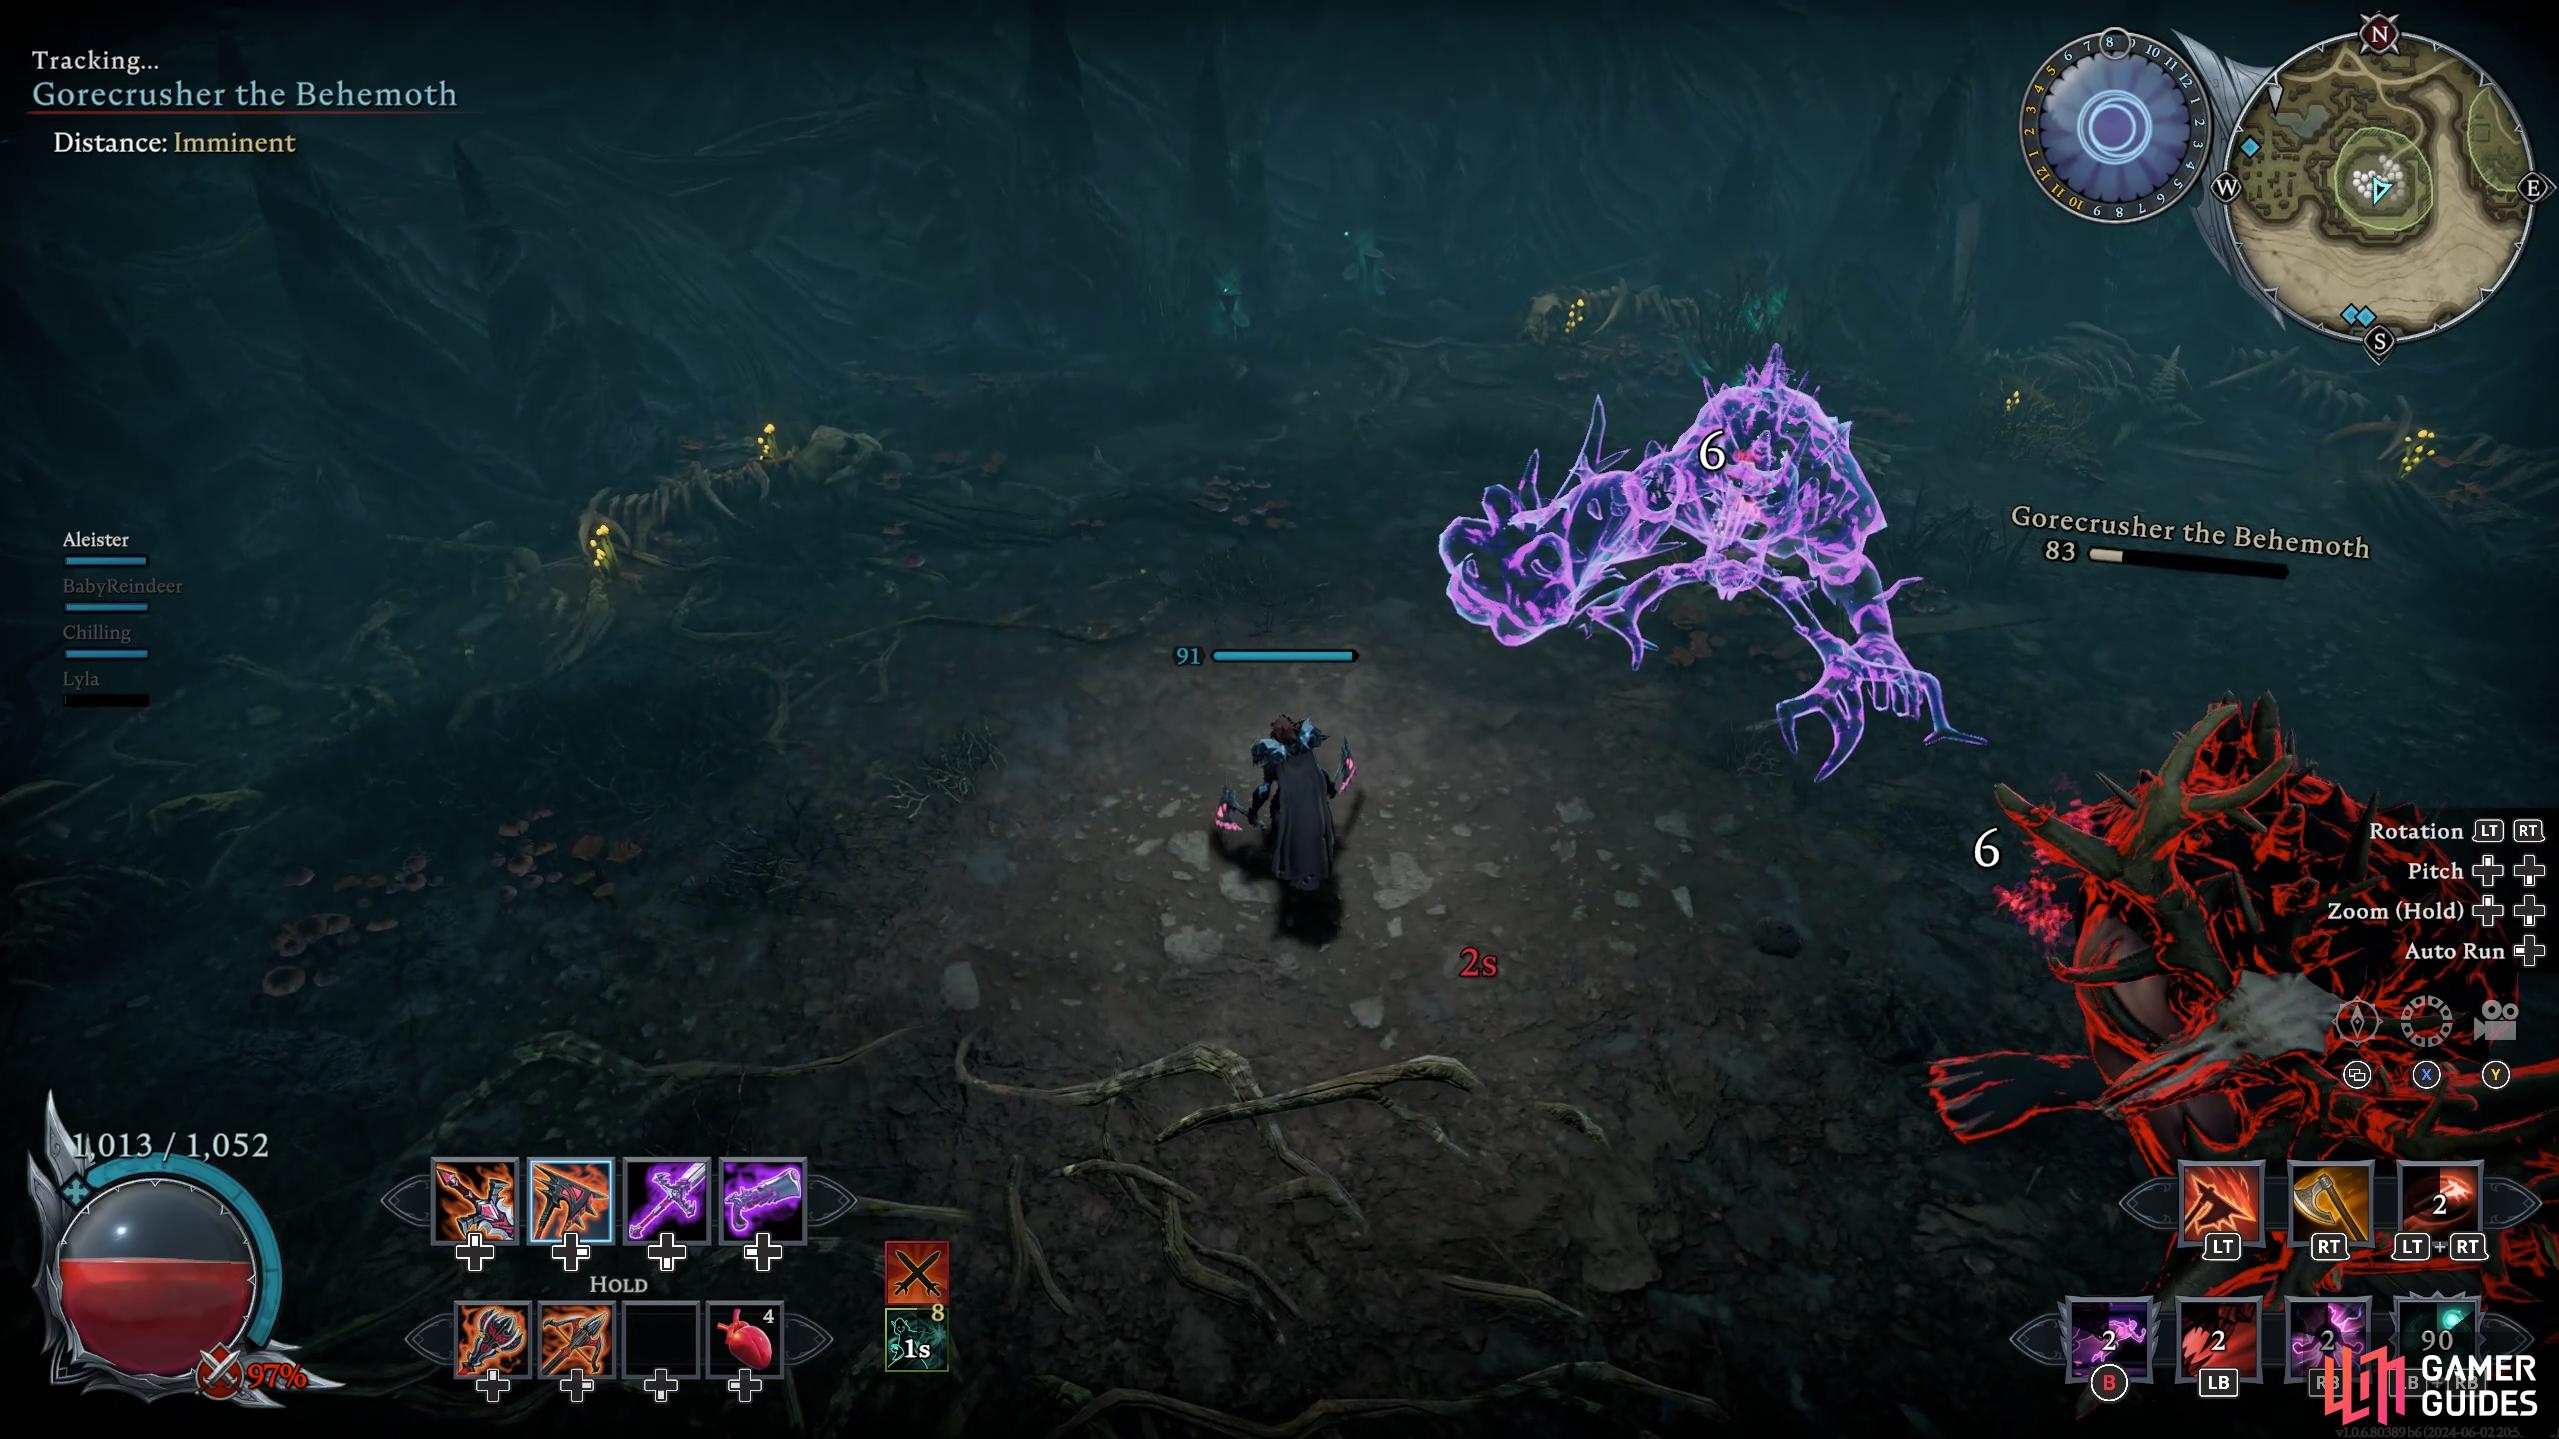 When you reduce the Spectral Behemoths health, it’ll be in a downed state before eventually getting back up.